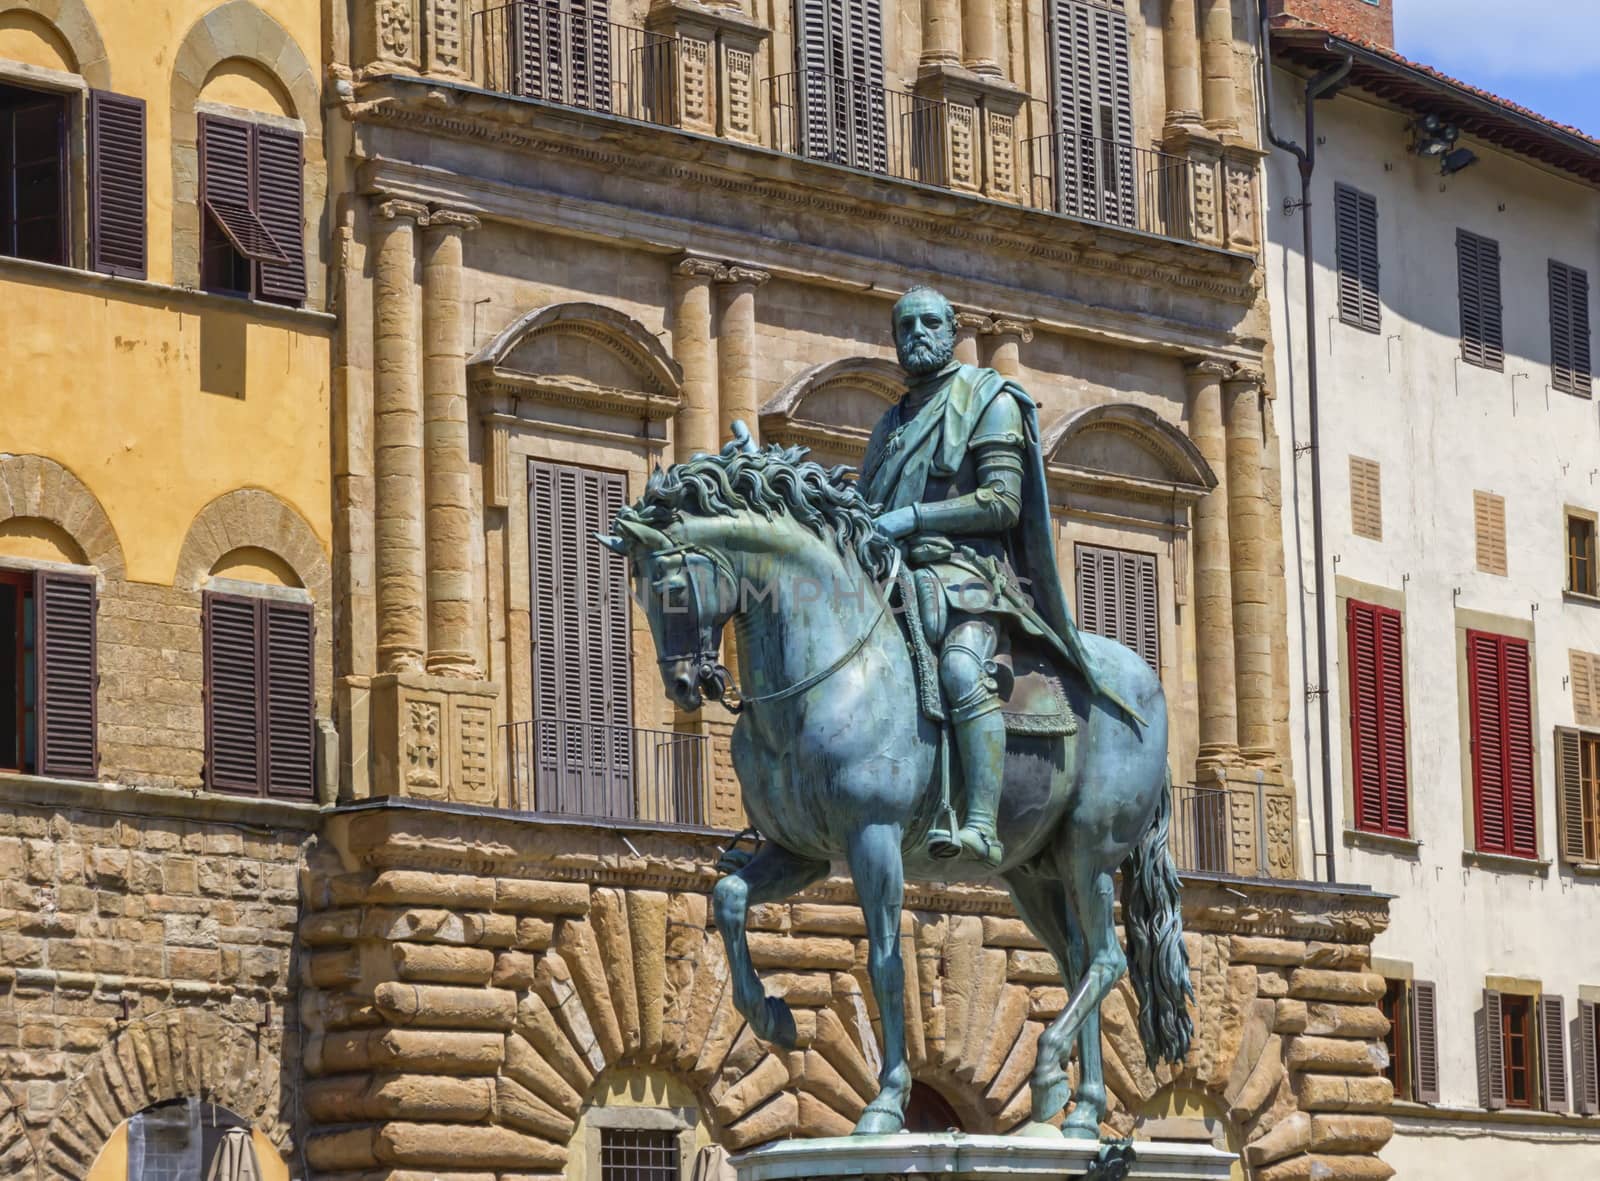 Equestrian statue of Cosimo I in Signoria Square of Florence, Italy by Elenaphotos21